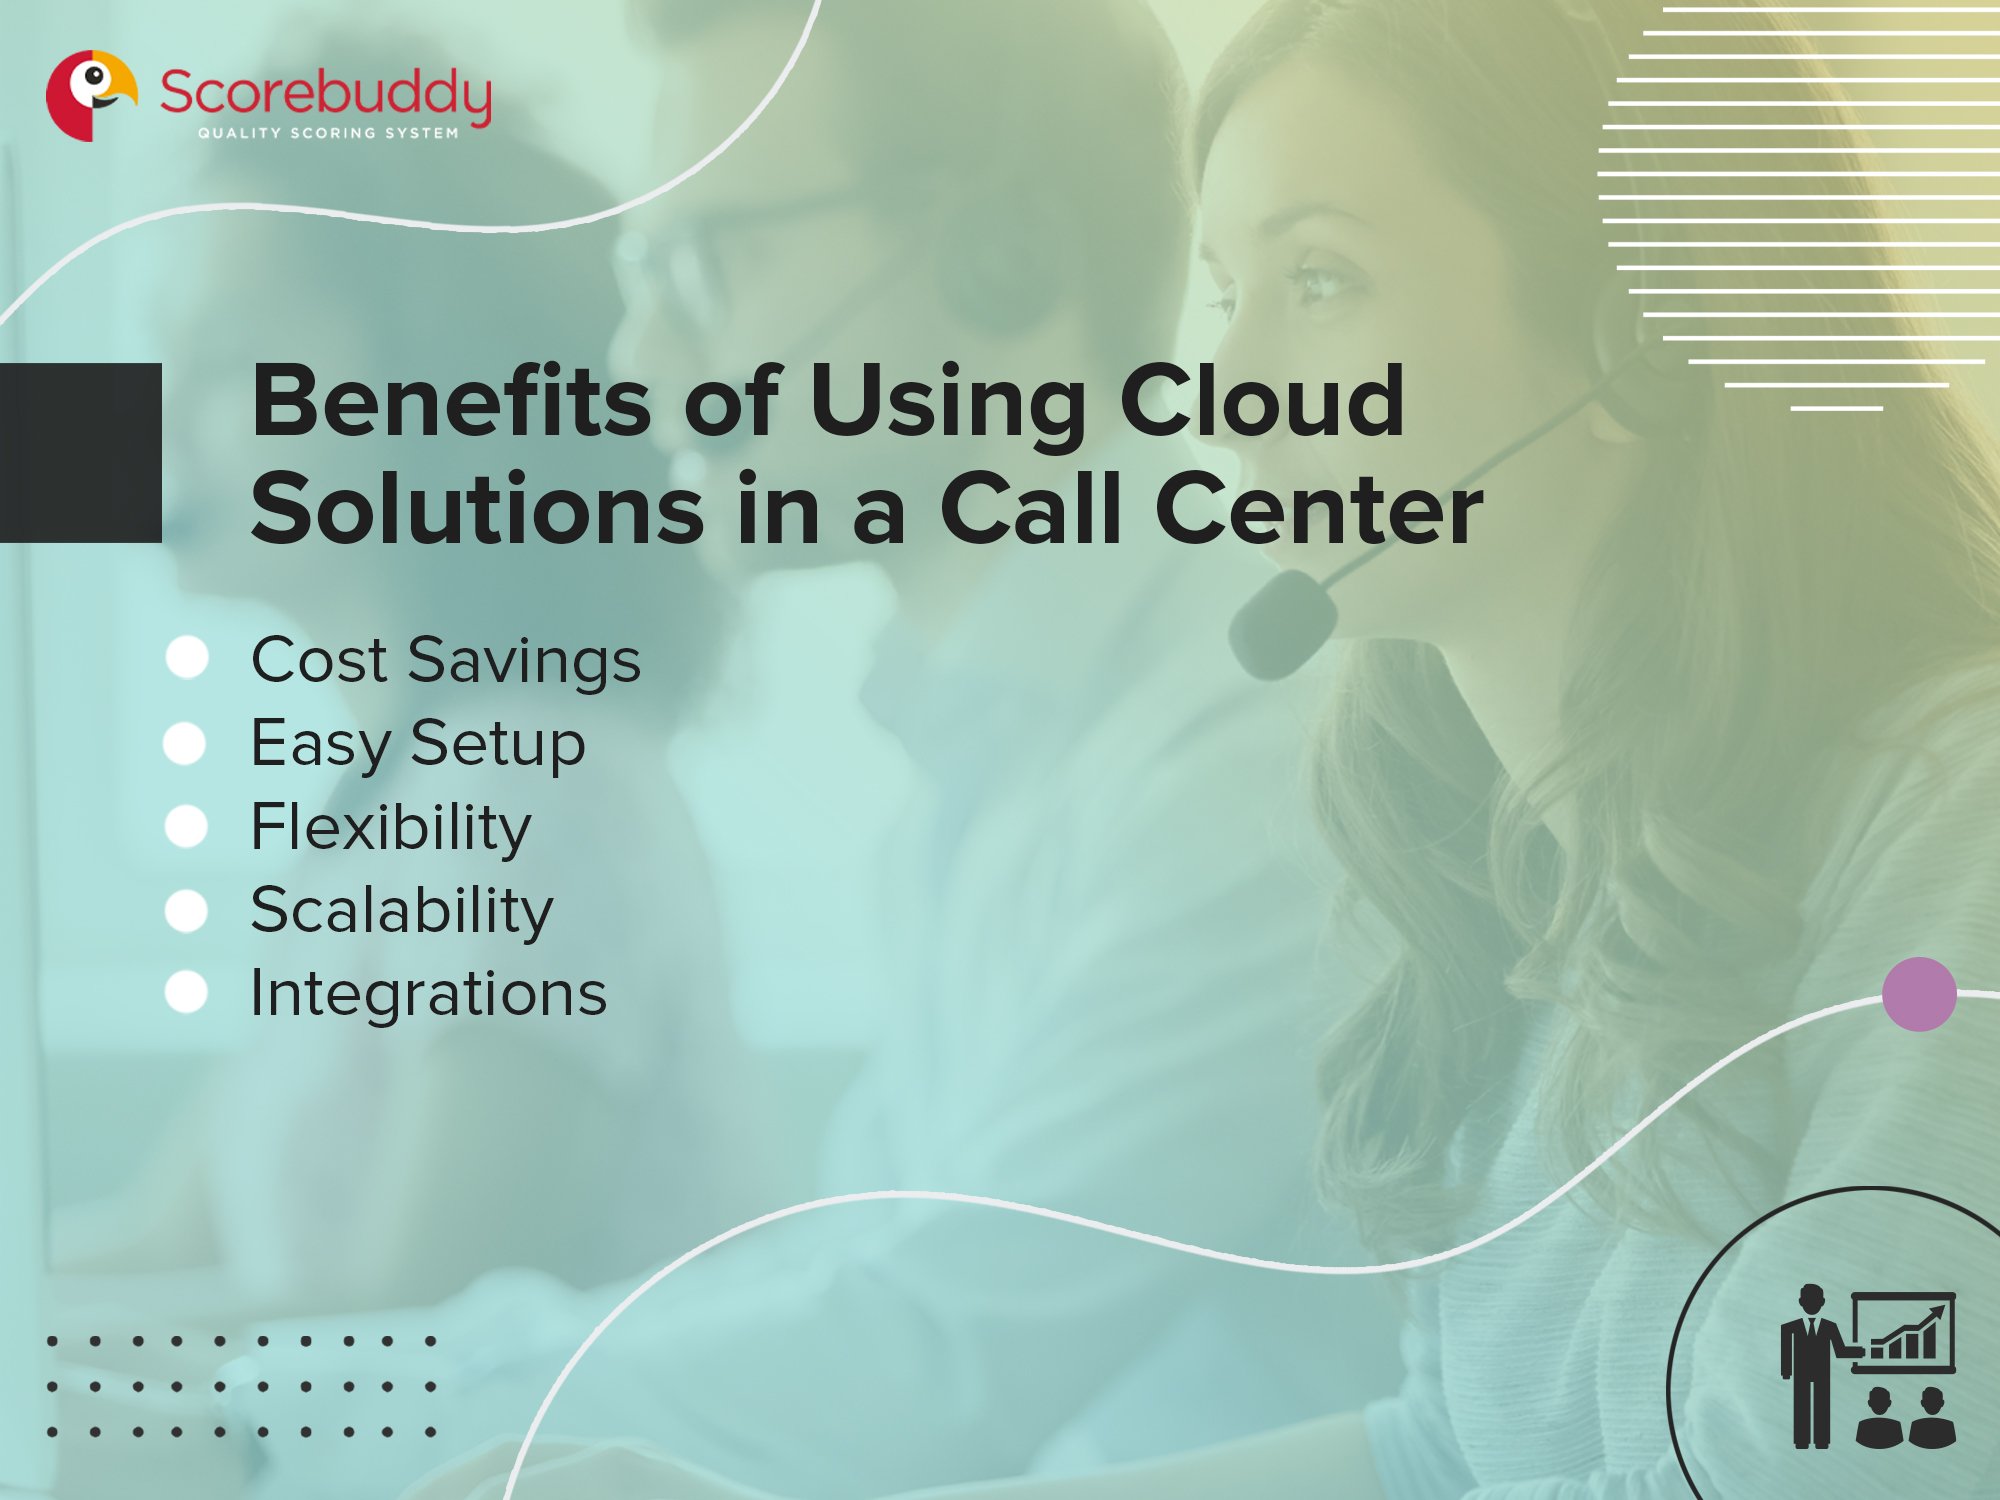 Benefits of Using Cloud Solutions in a Contact Center - 2